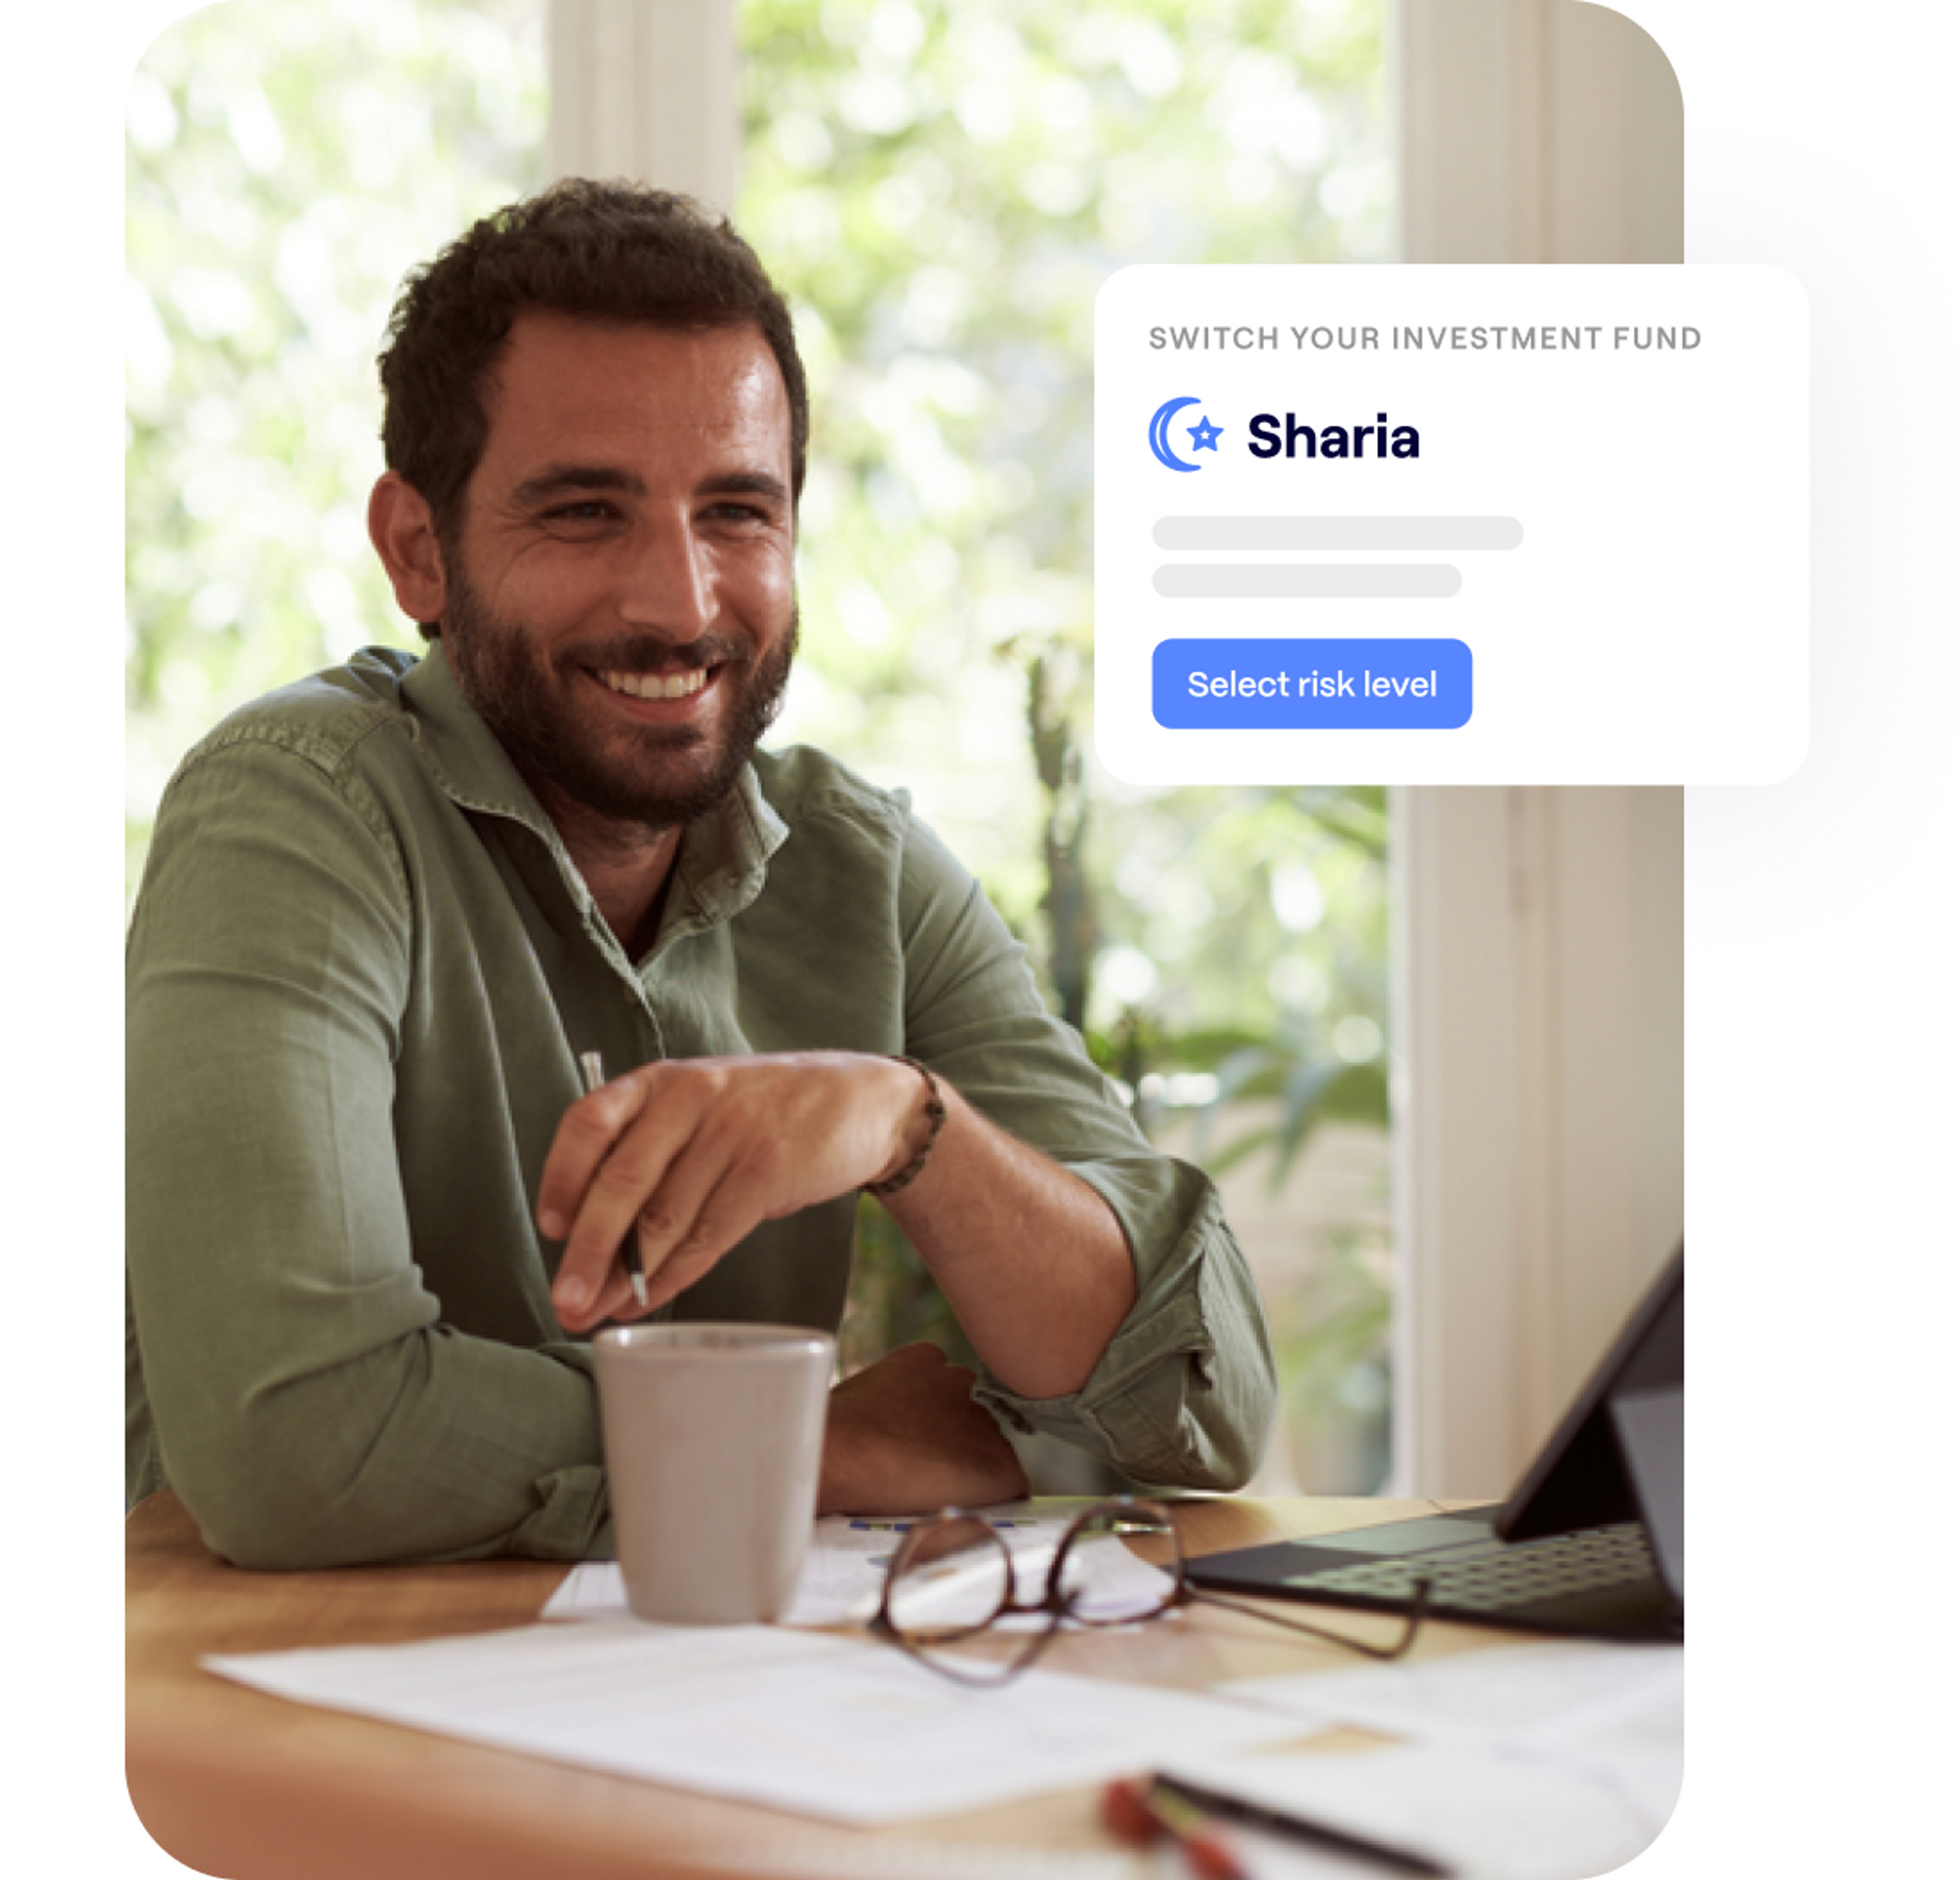 A photo of a smiling man sat down at a desk and an excerpt of the Penfold pension app showing the Sharia investment fund screen